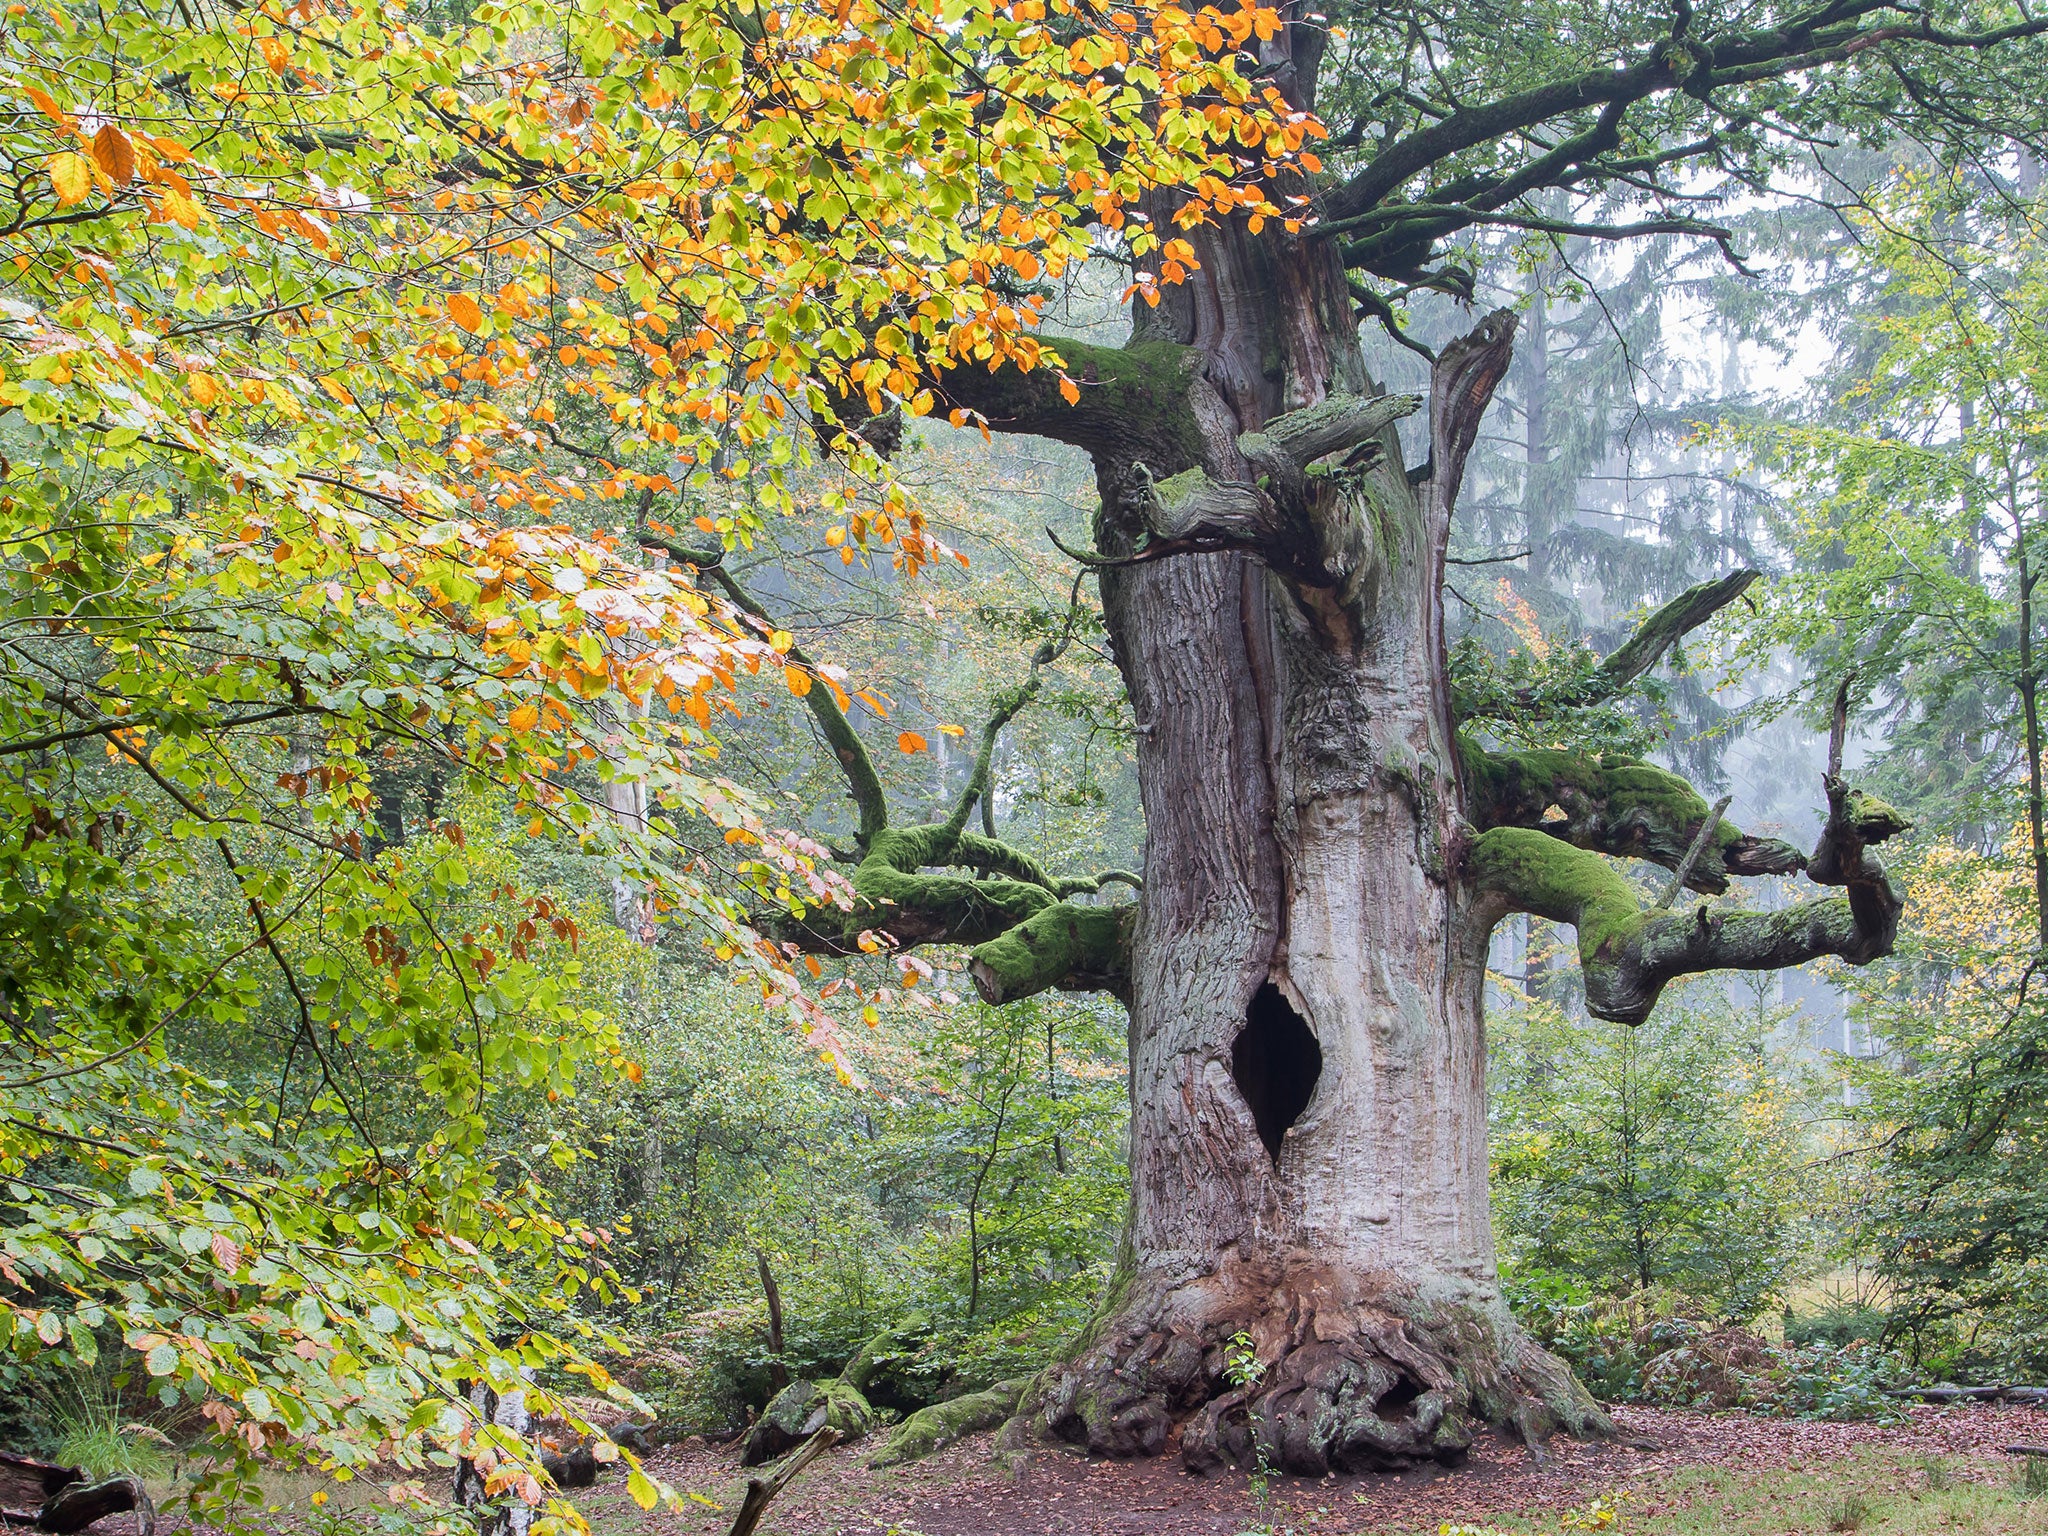 The Woodland Trust describes the English oak as “arguably the best known and loved of British native trees”